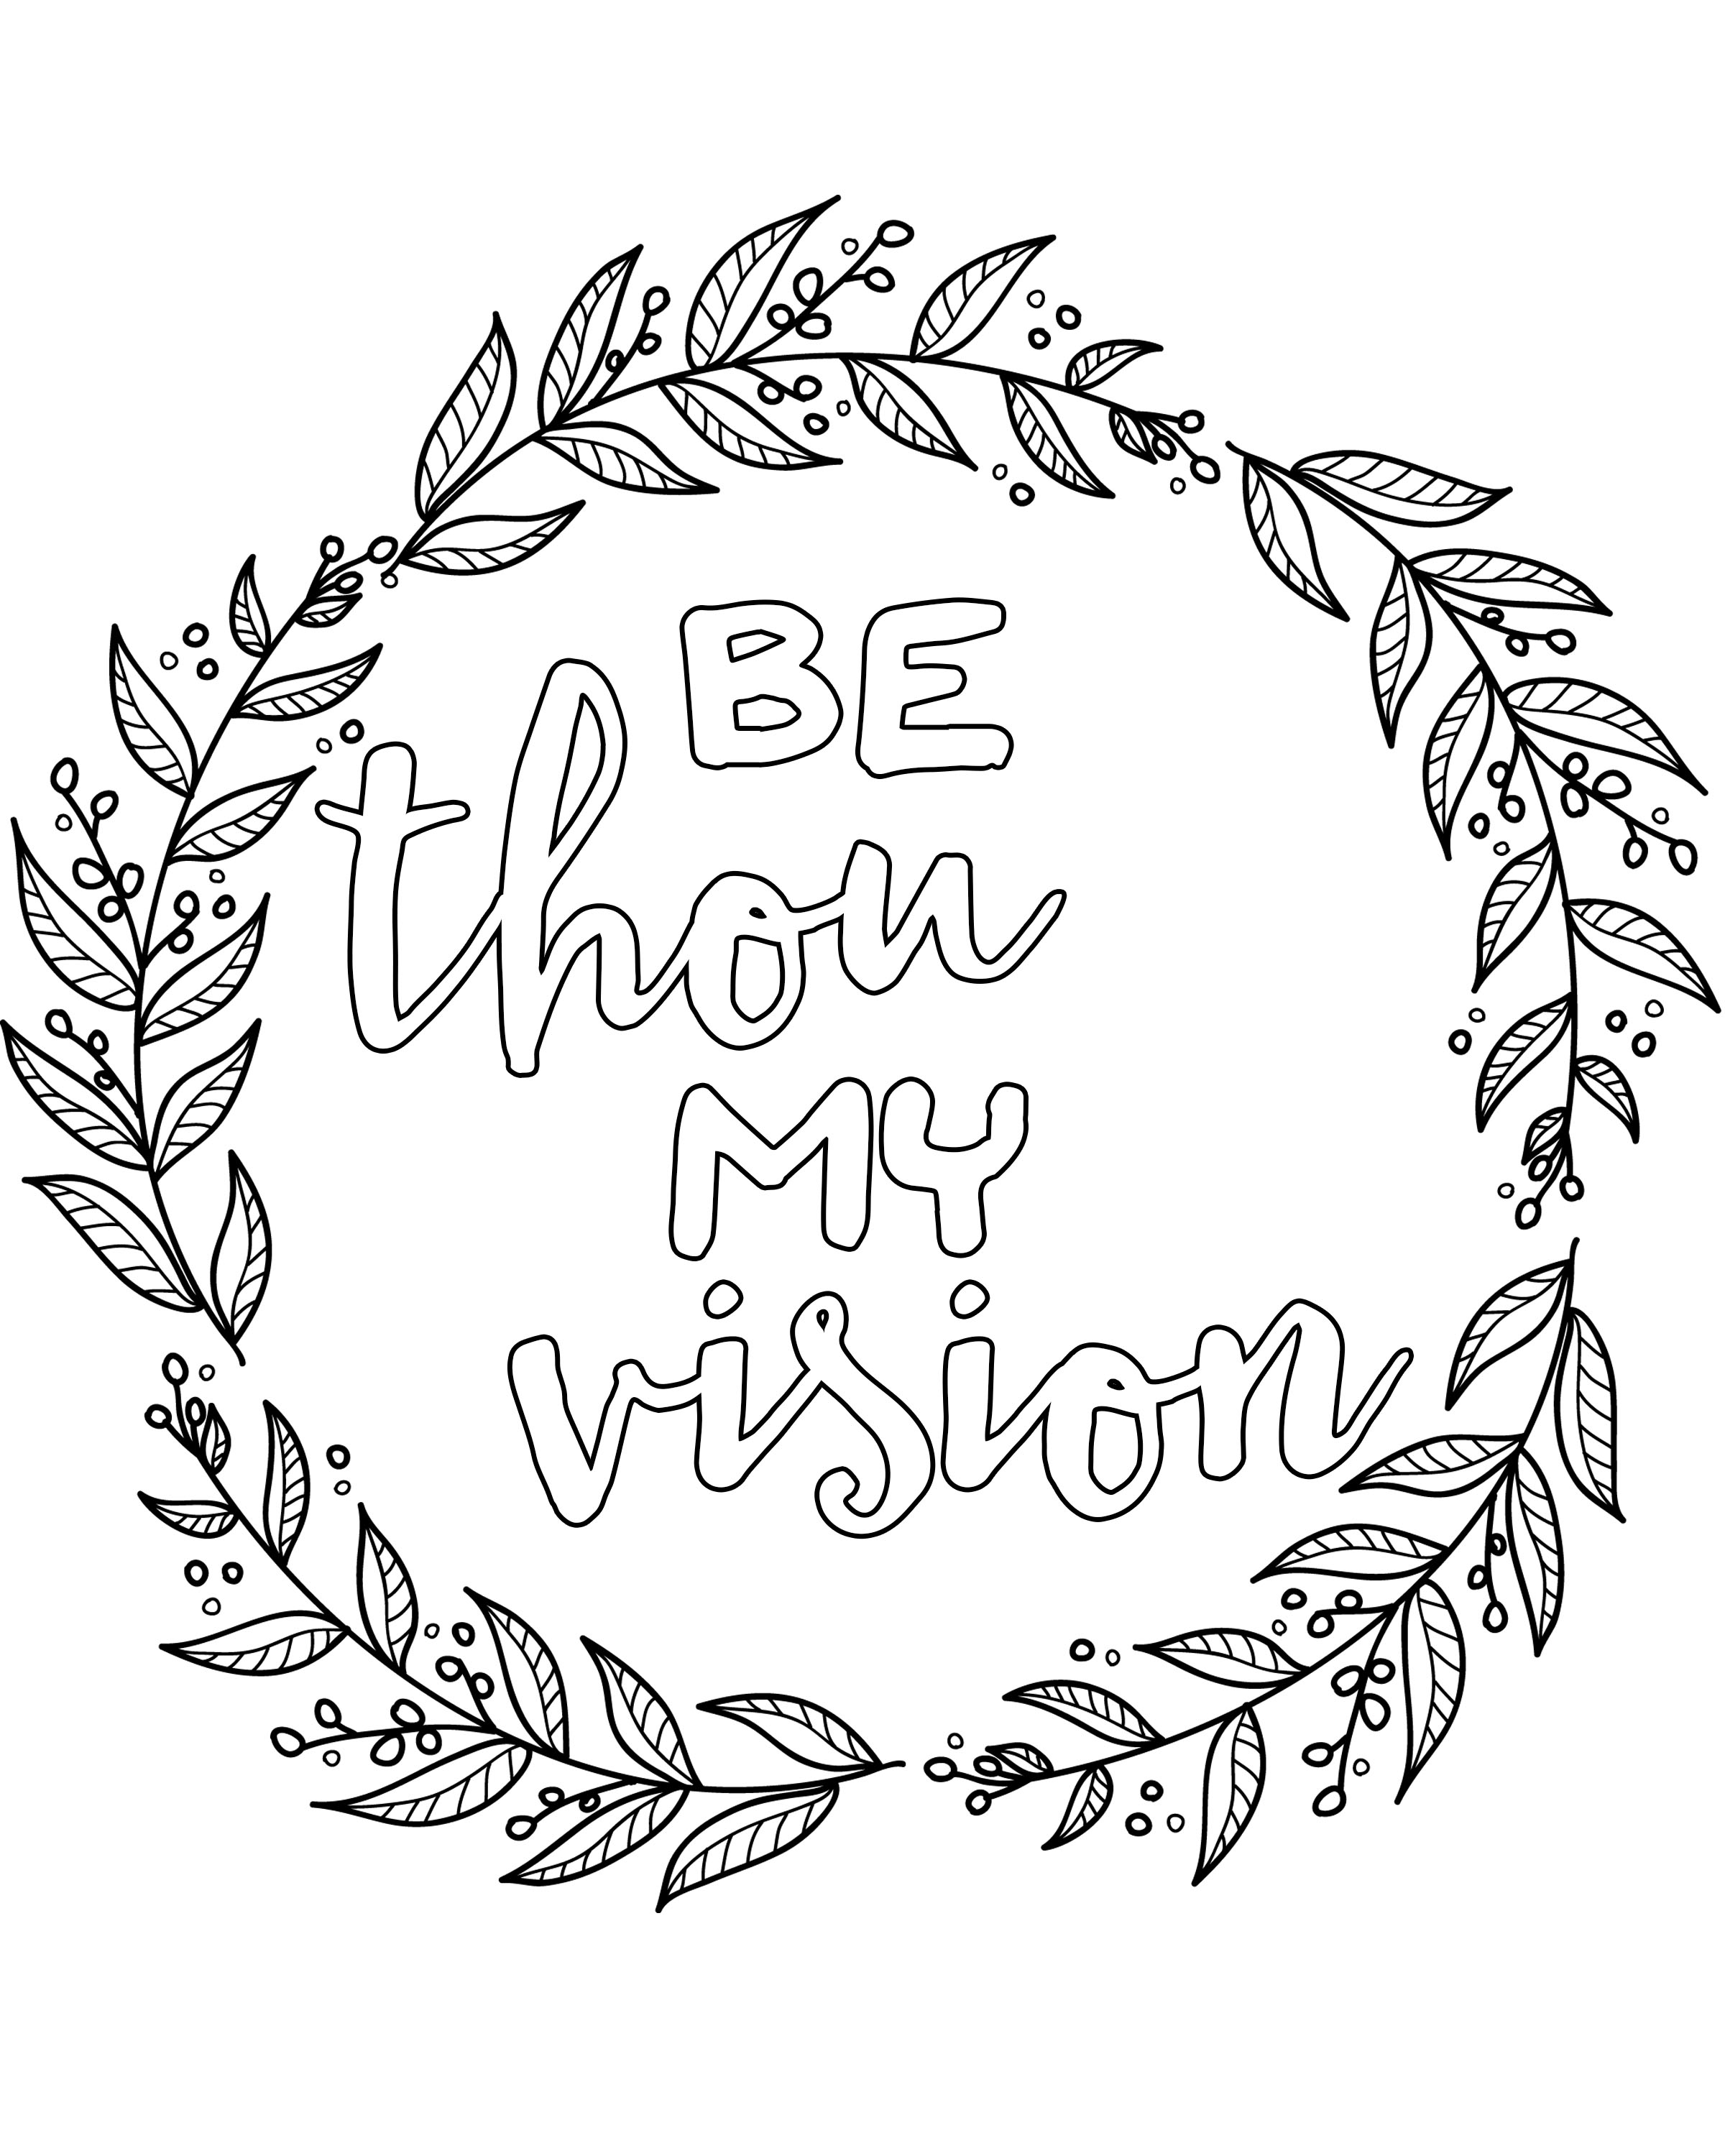 Free Christian Coloring Pages For Adults At GetDrawings Free Download